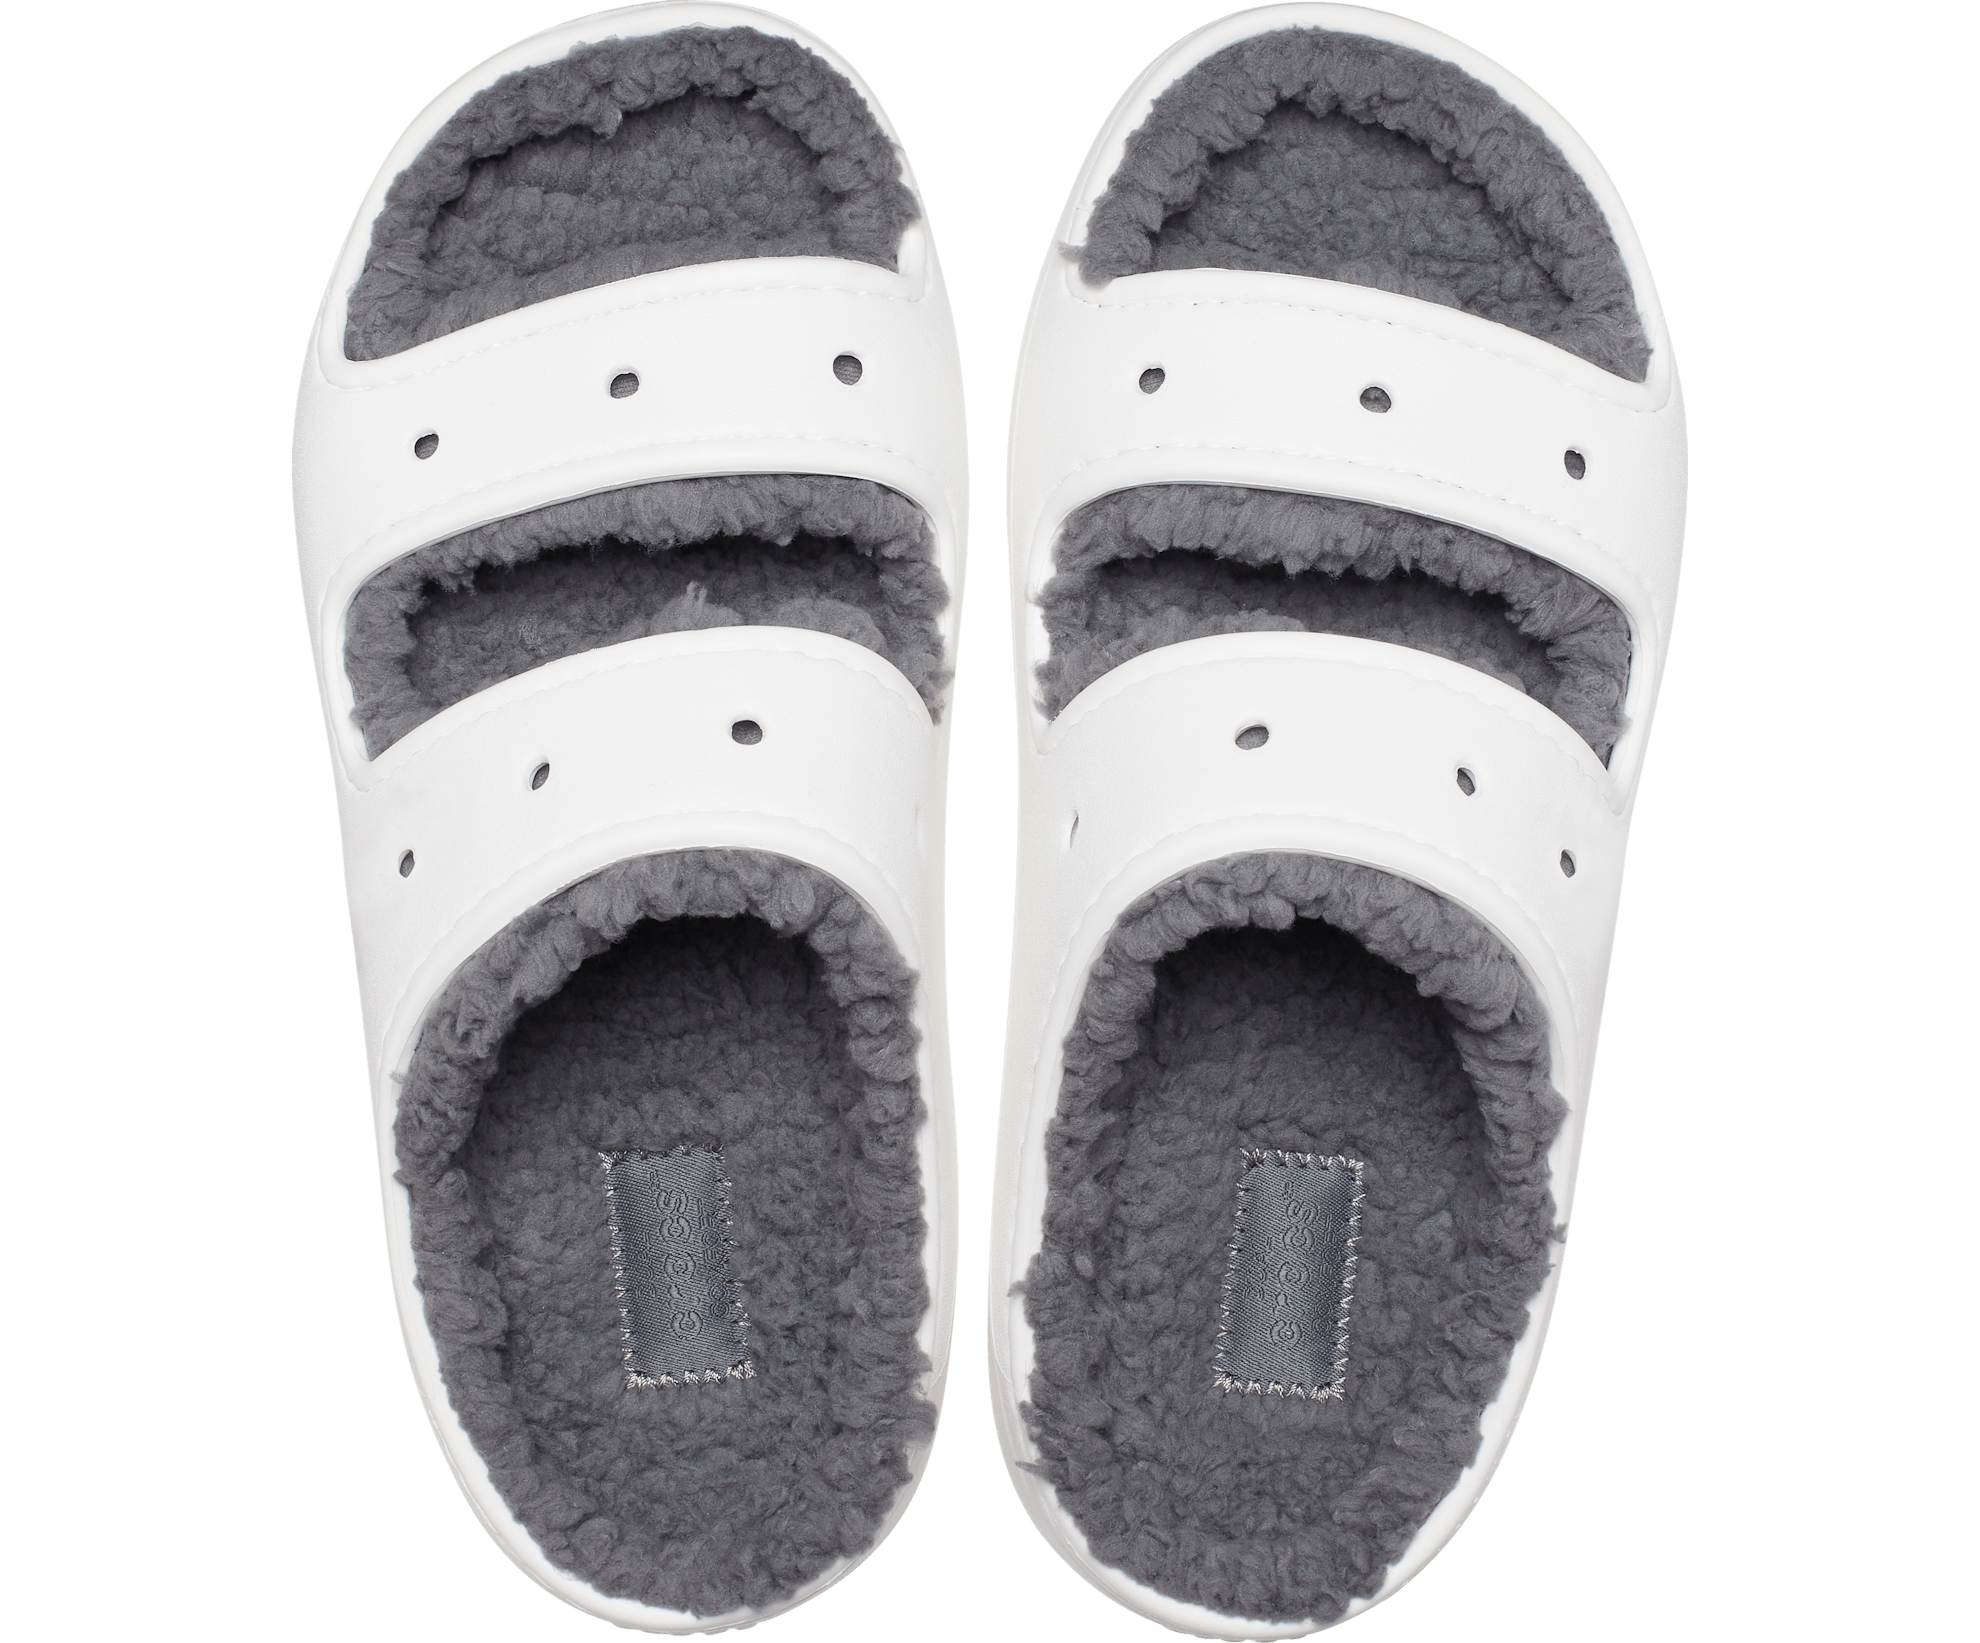 Crocs Unisex Classic Cozzzy Lined Sandal - White - The Foot Factory